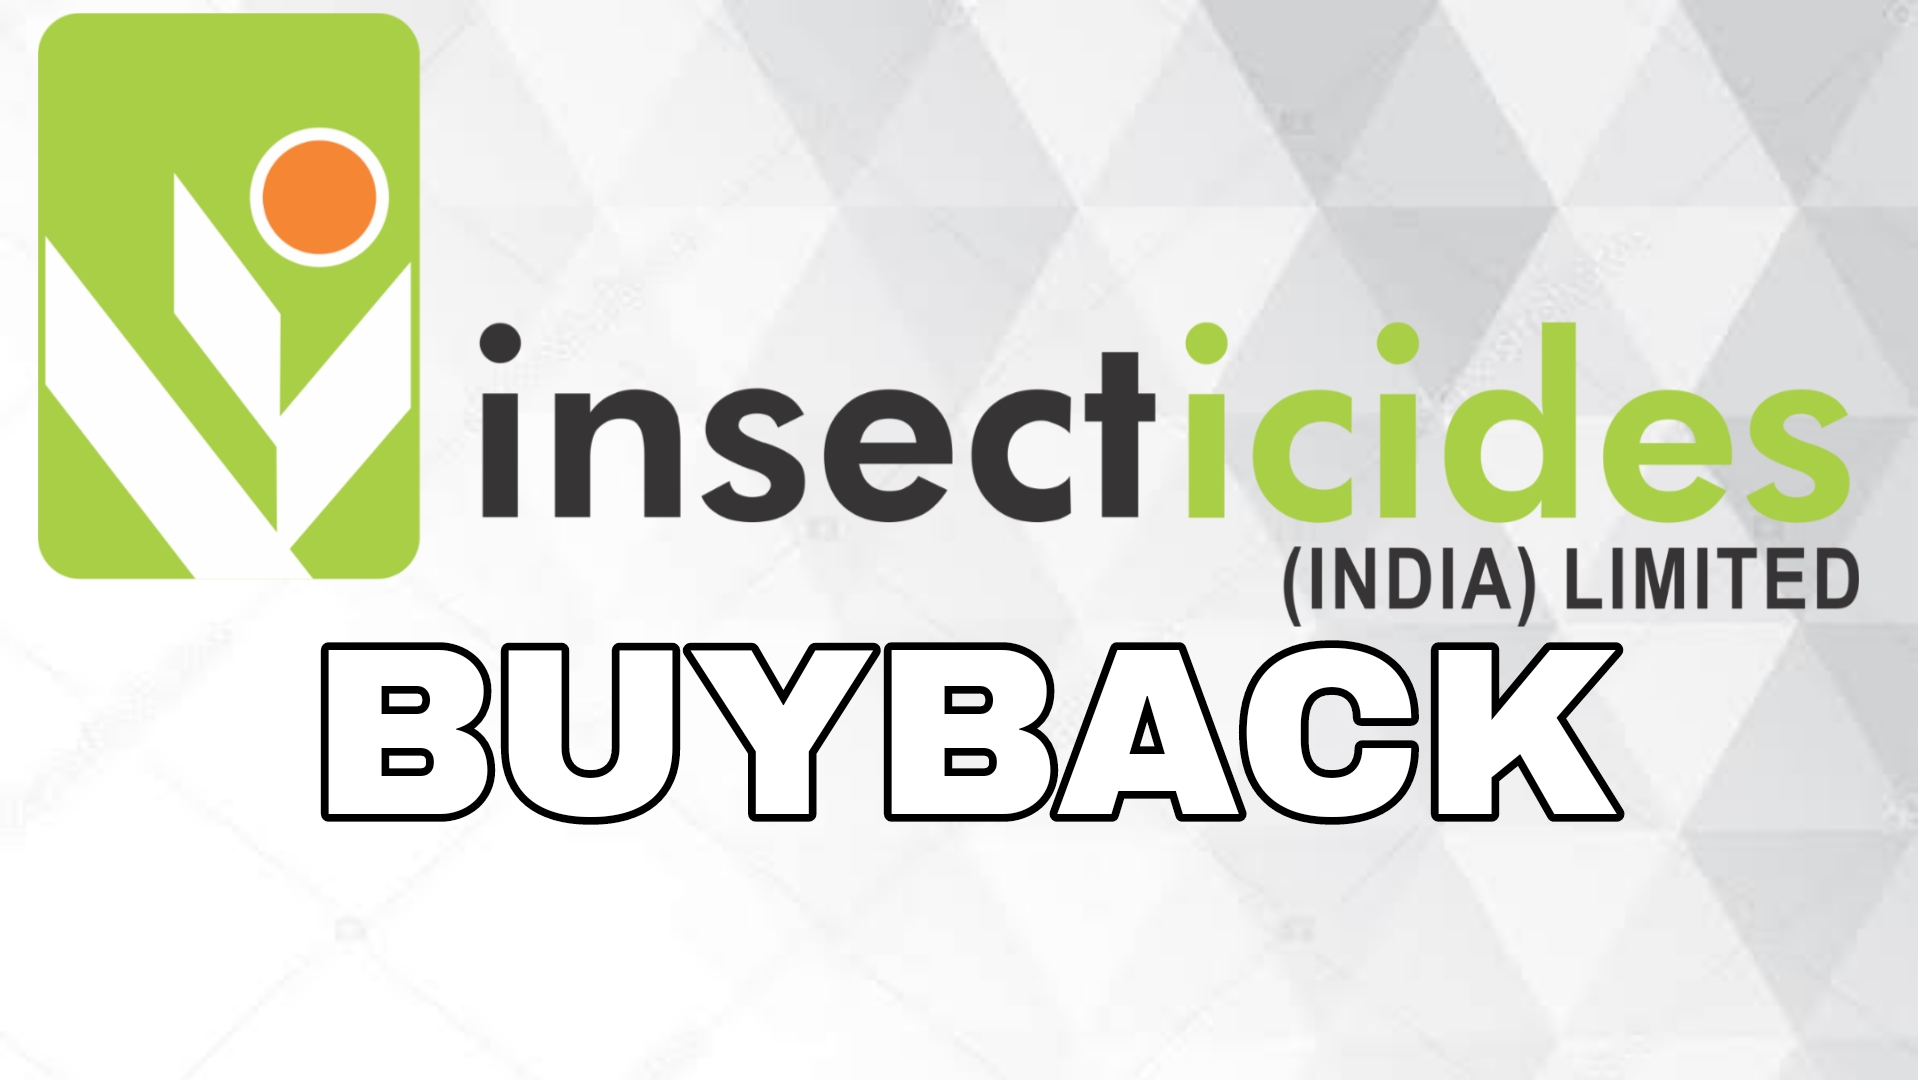 Insecticides India Buyback